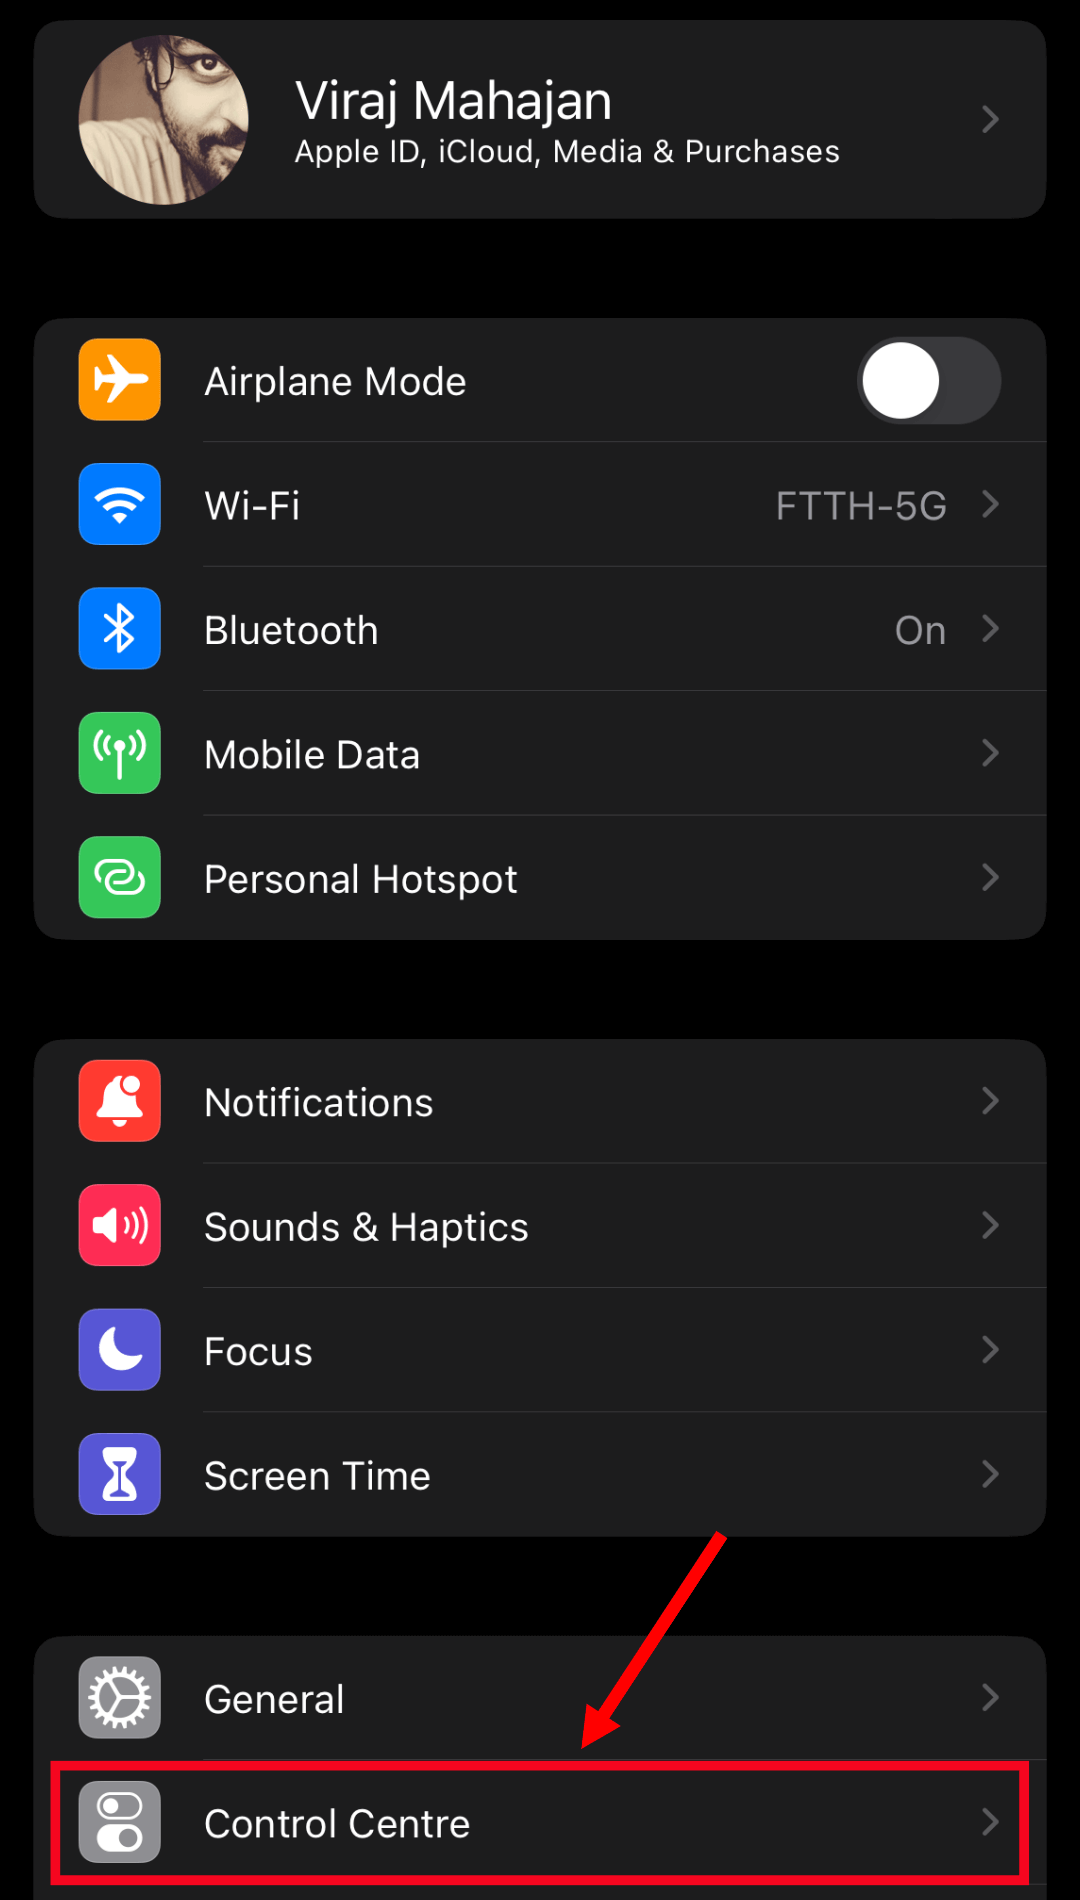 go to settings and control centre in your iPhone